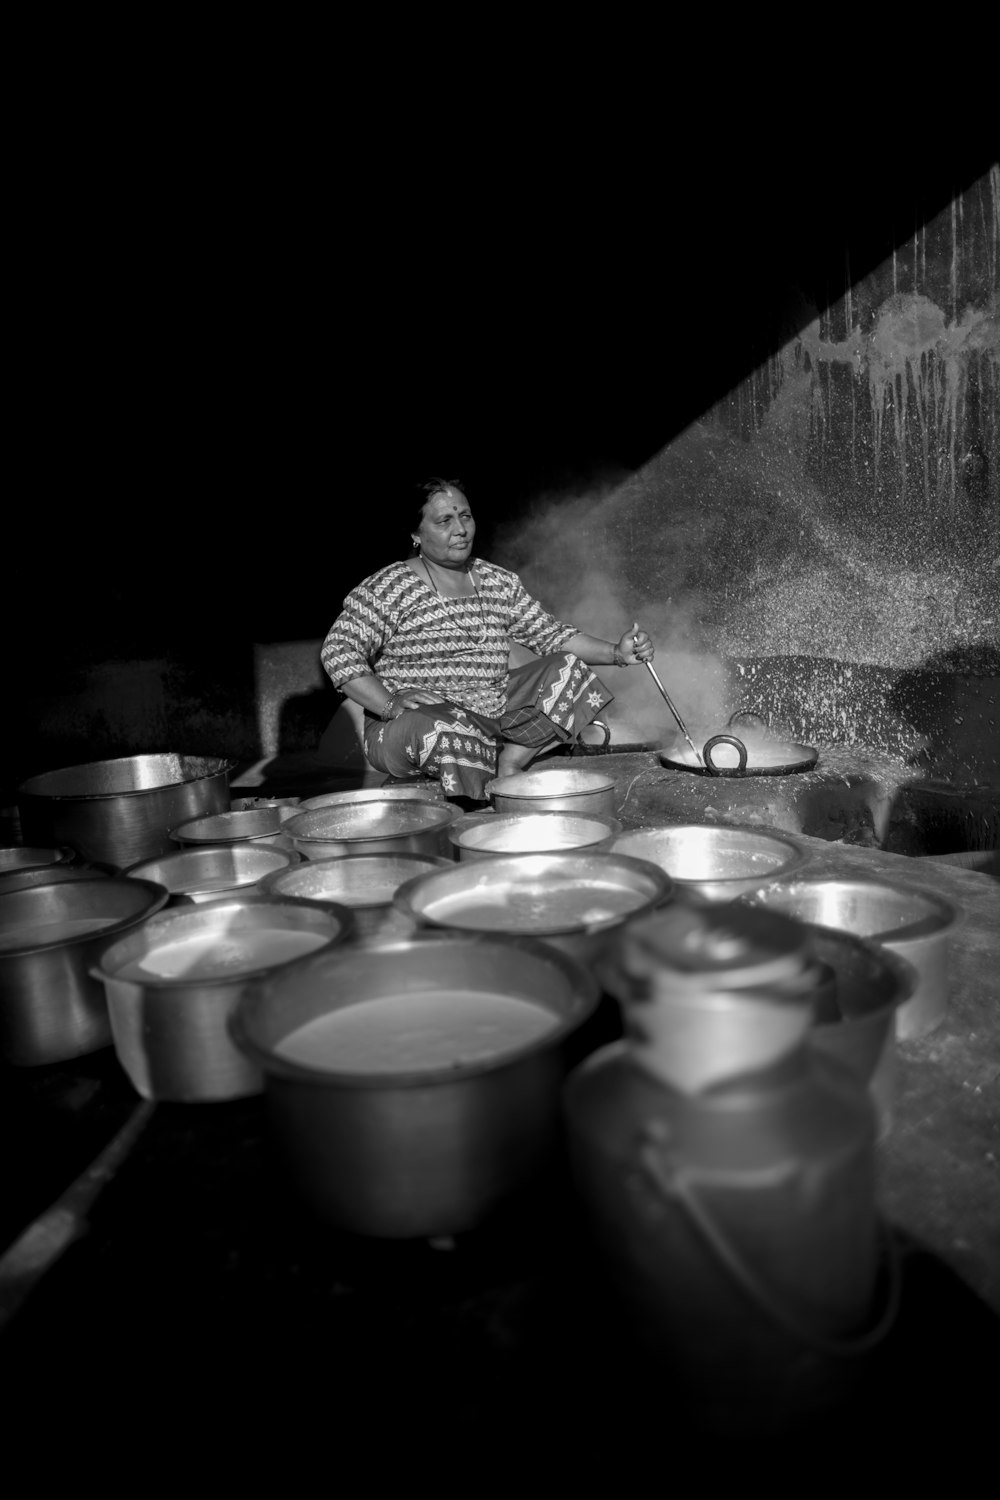 grayscale photography of woman cooking while holding a ladle